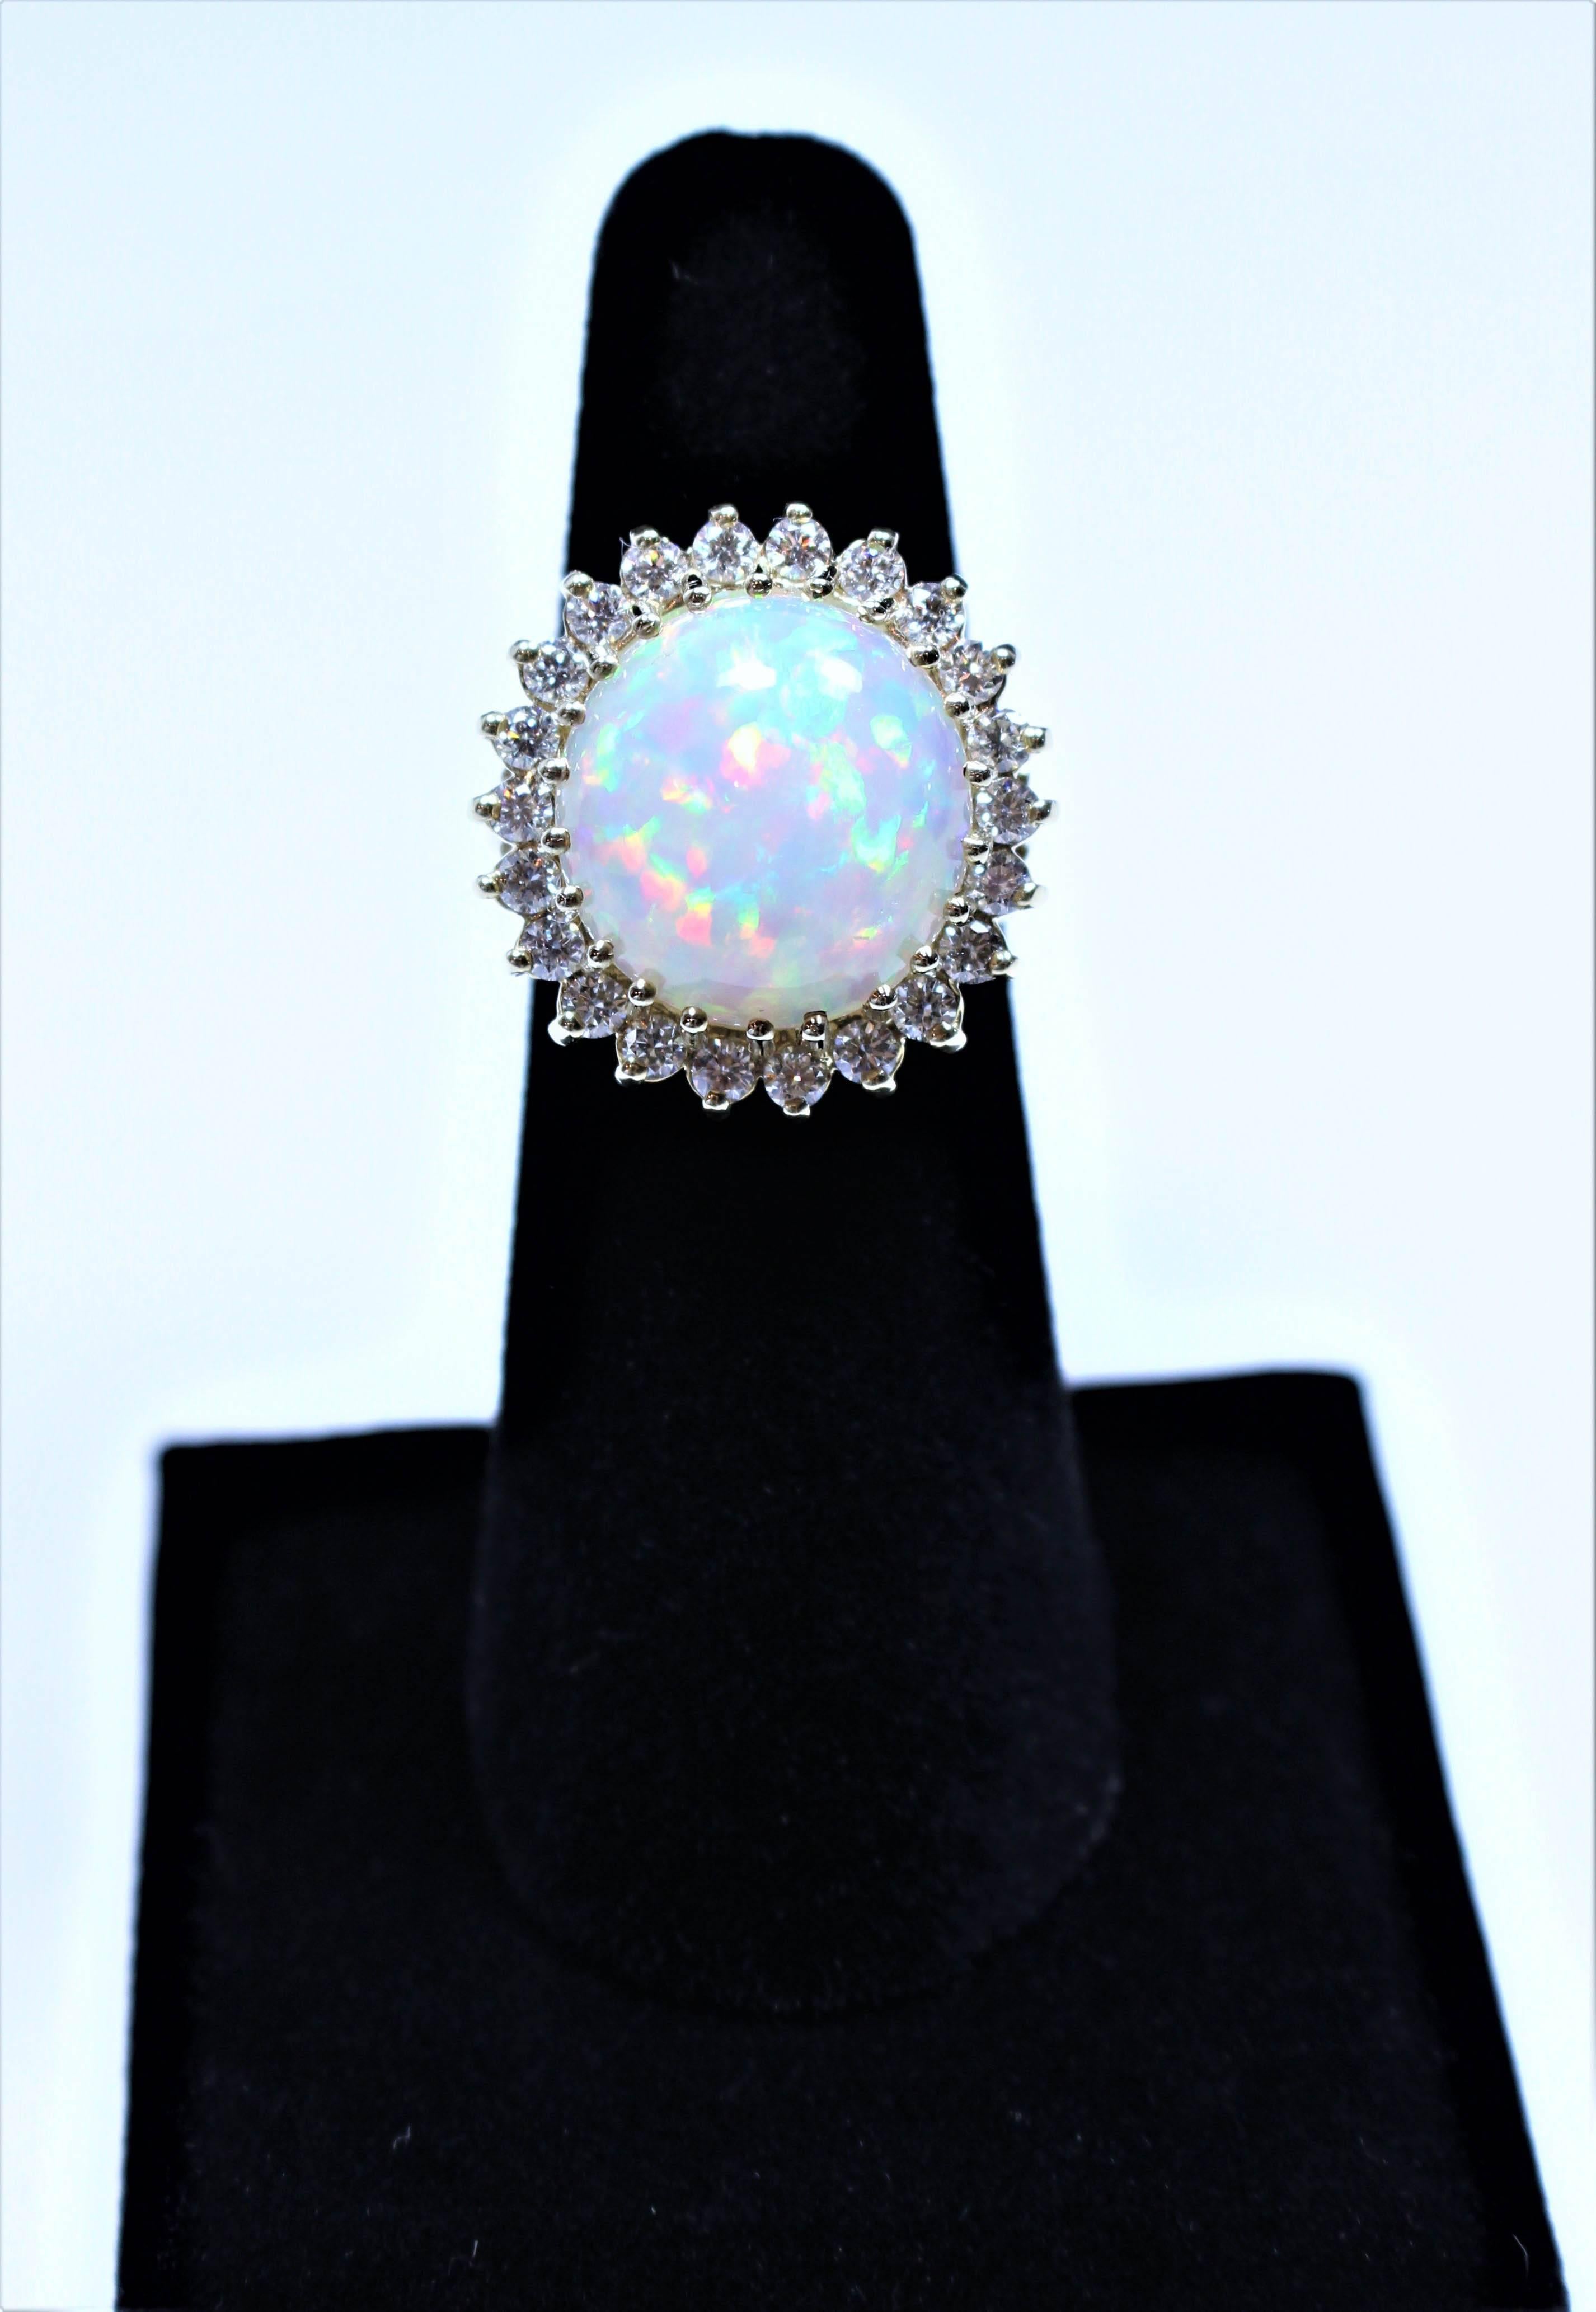 This ring is composed of 14kt yellow gold and features a vibrant Opal center stone, which is approximately 8.11 carats. There are 22 round cut diamonds accenting the center stone. In excellent condition. Size 6.5 easily sizable.

Please feel free